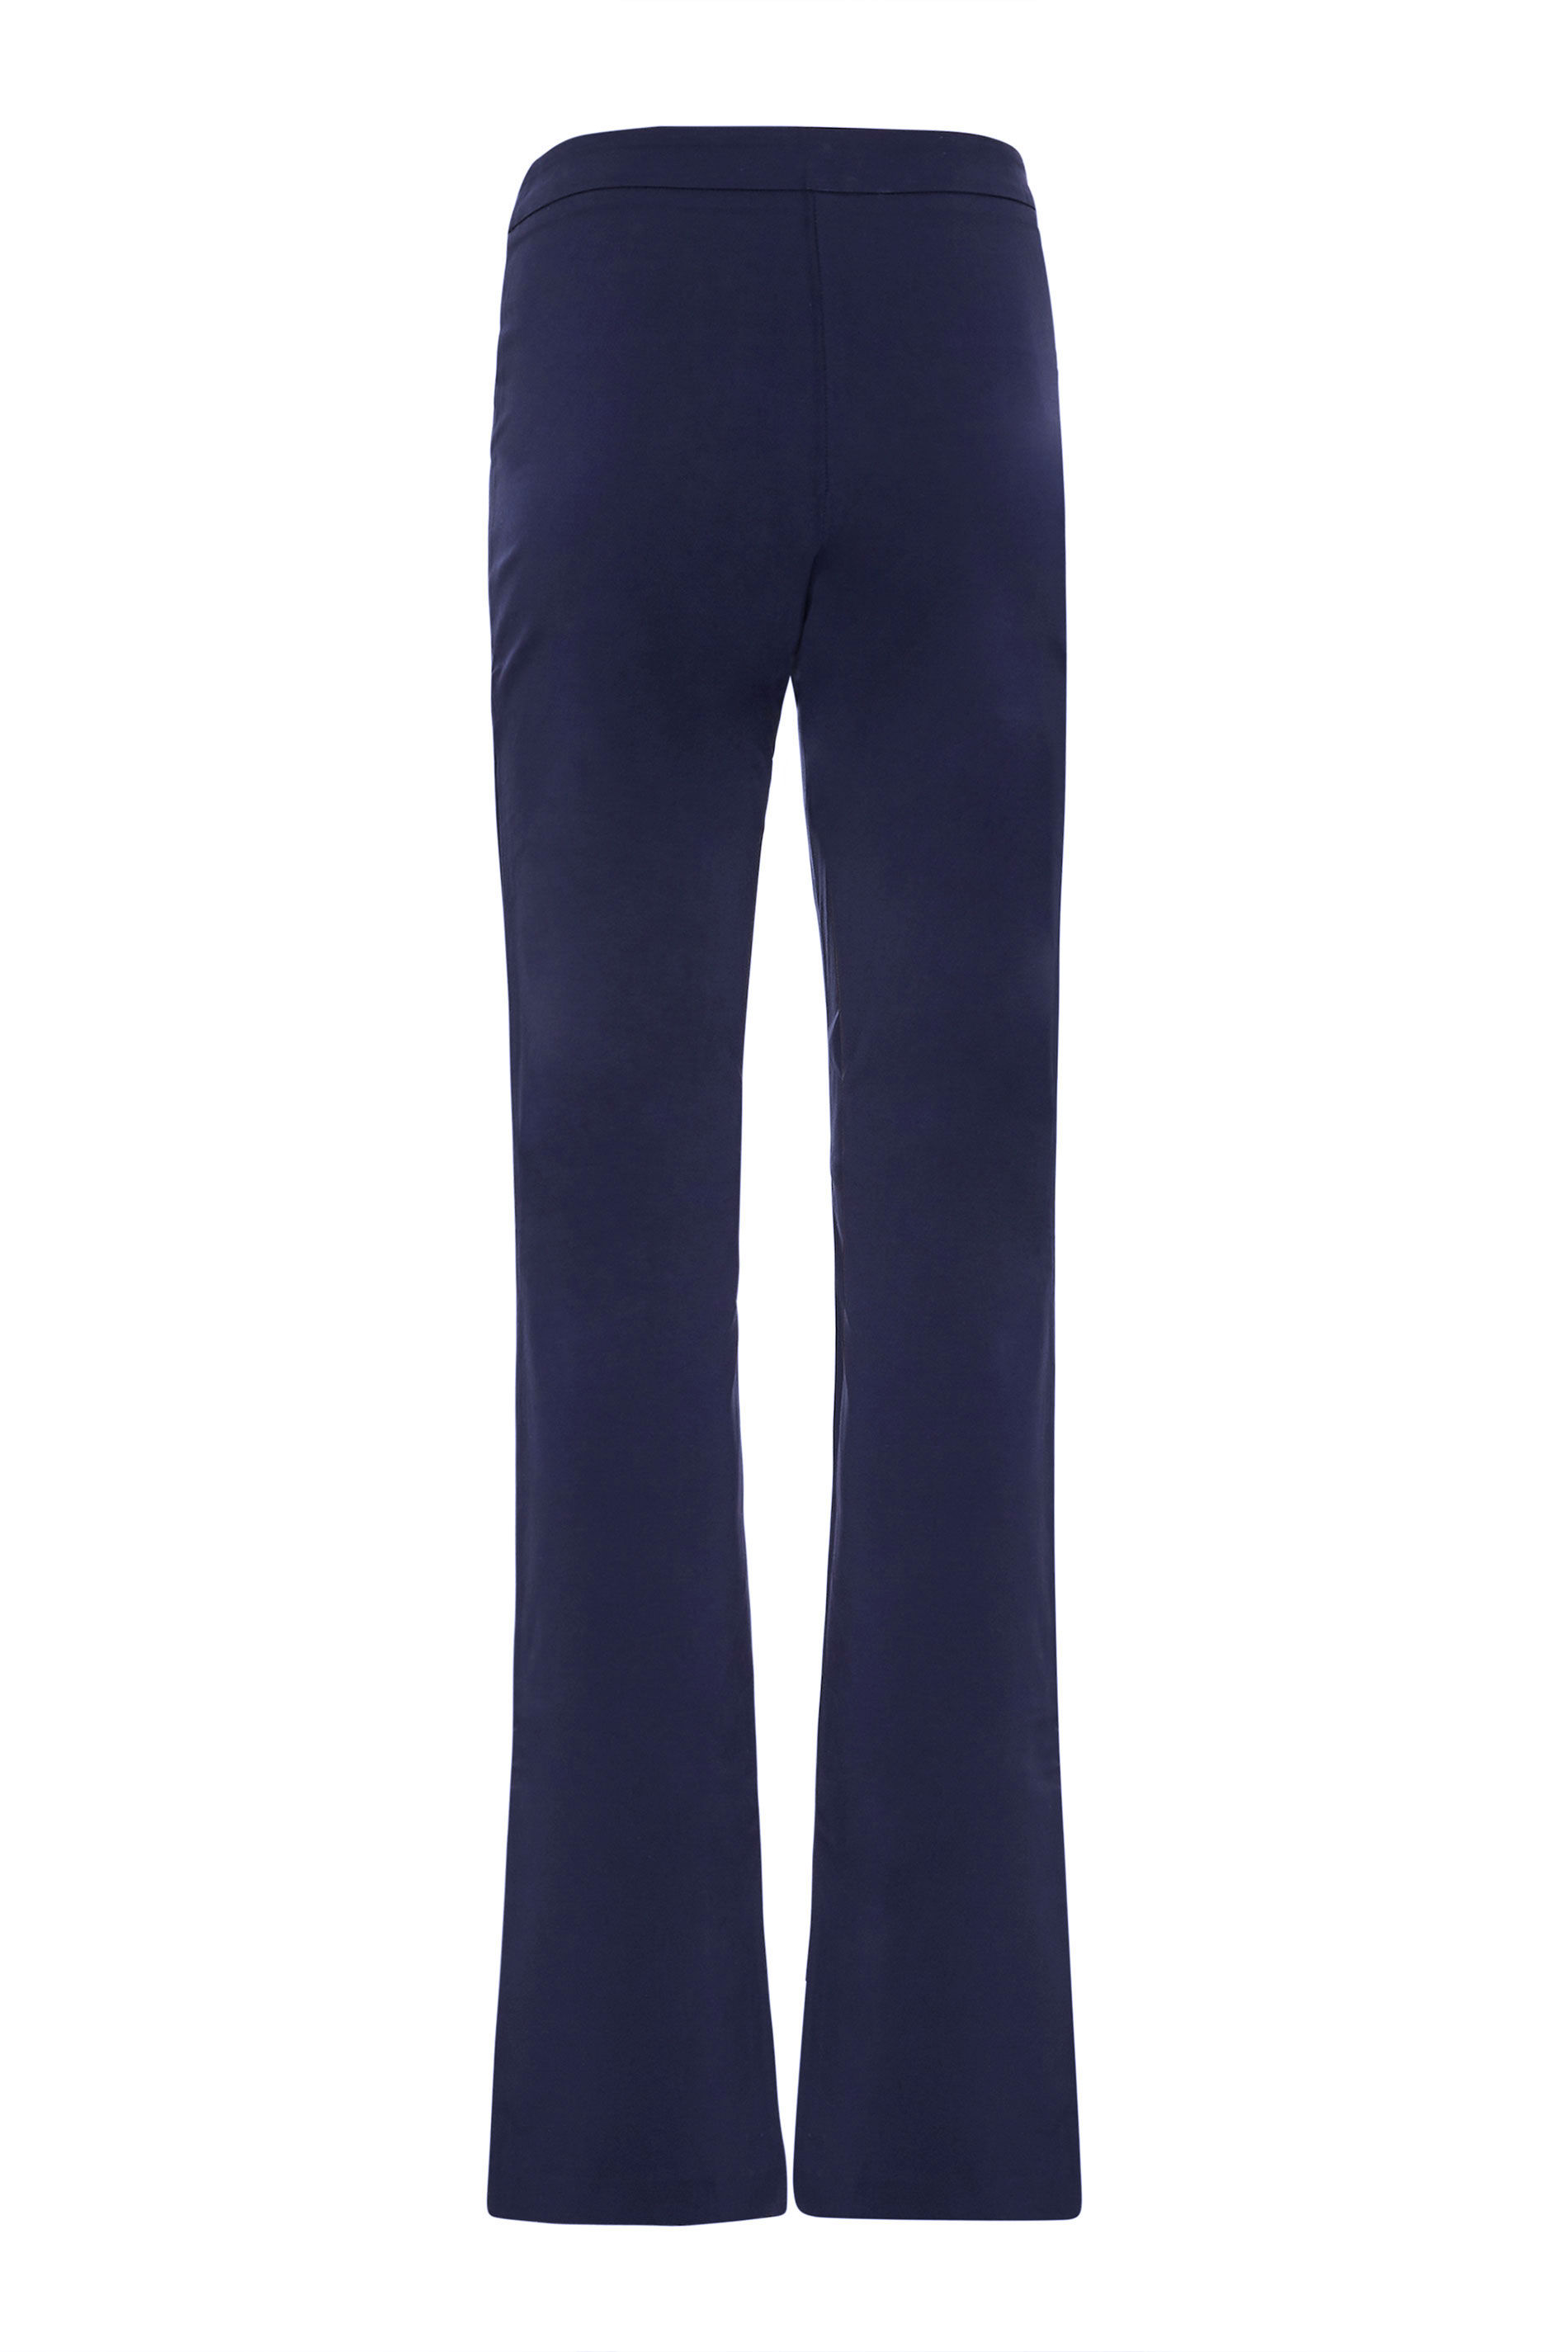 Navy Allegro Bootcut Trousers | Long Tall Sally